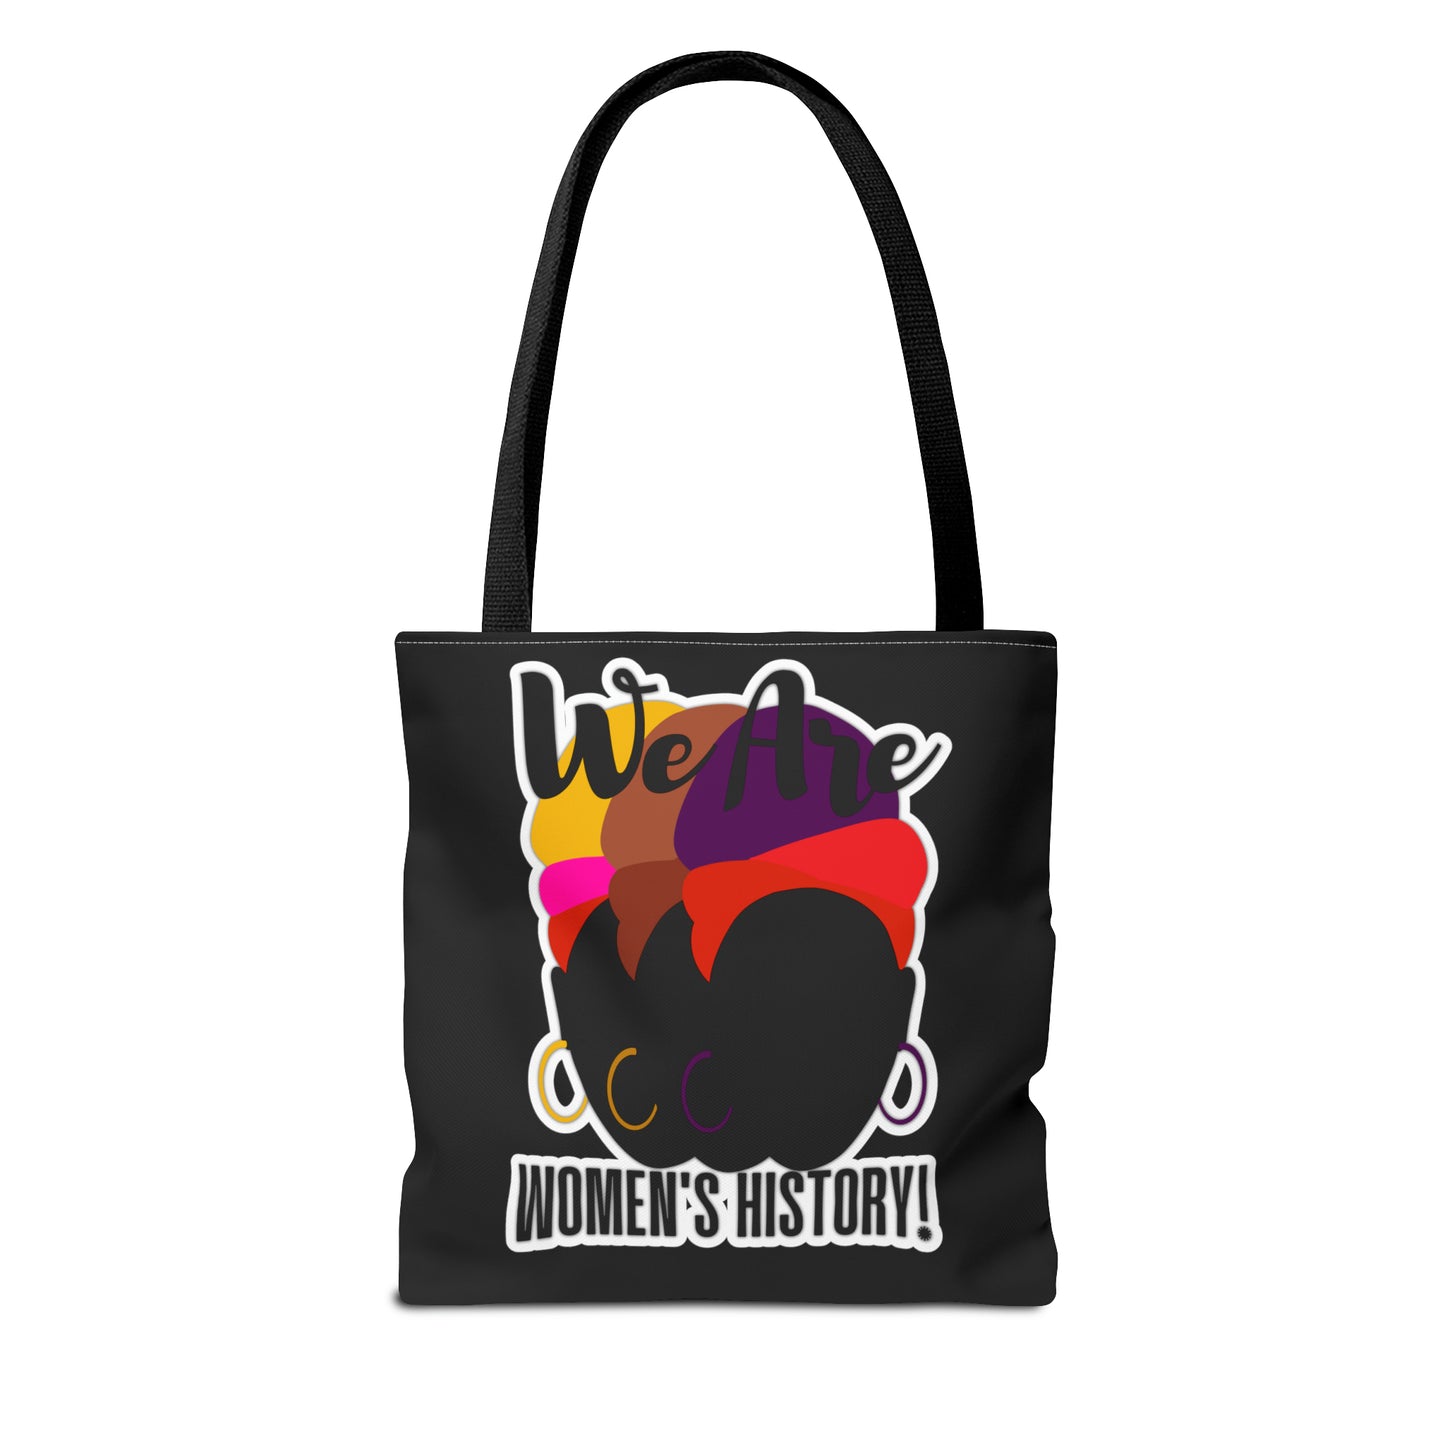 We Are Women History Tote Bag